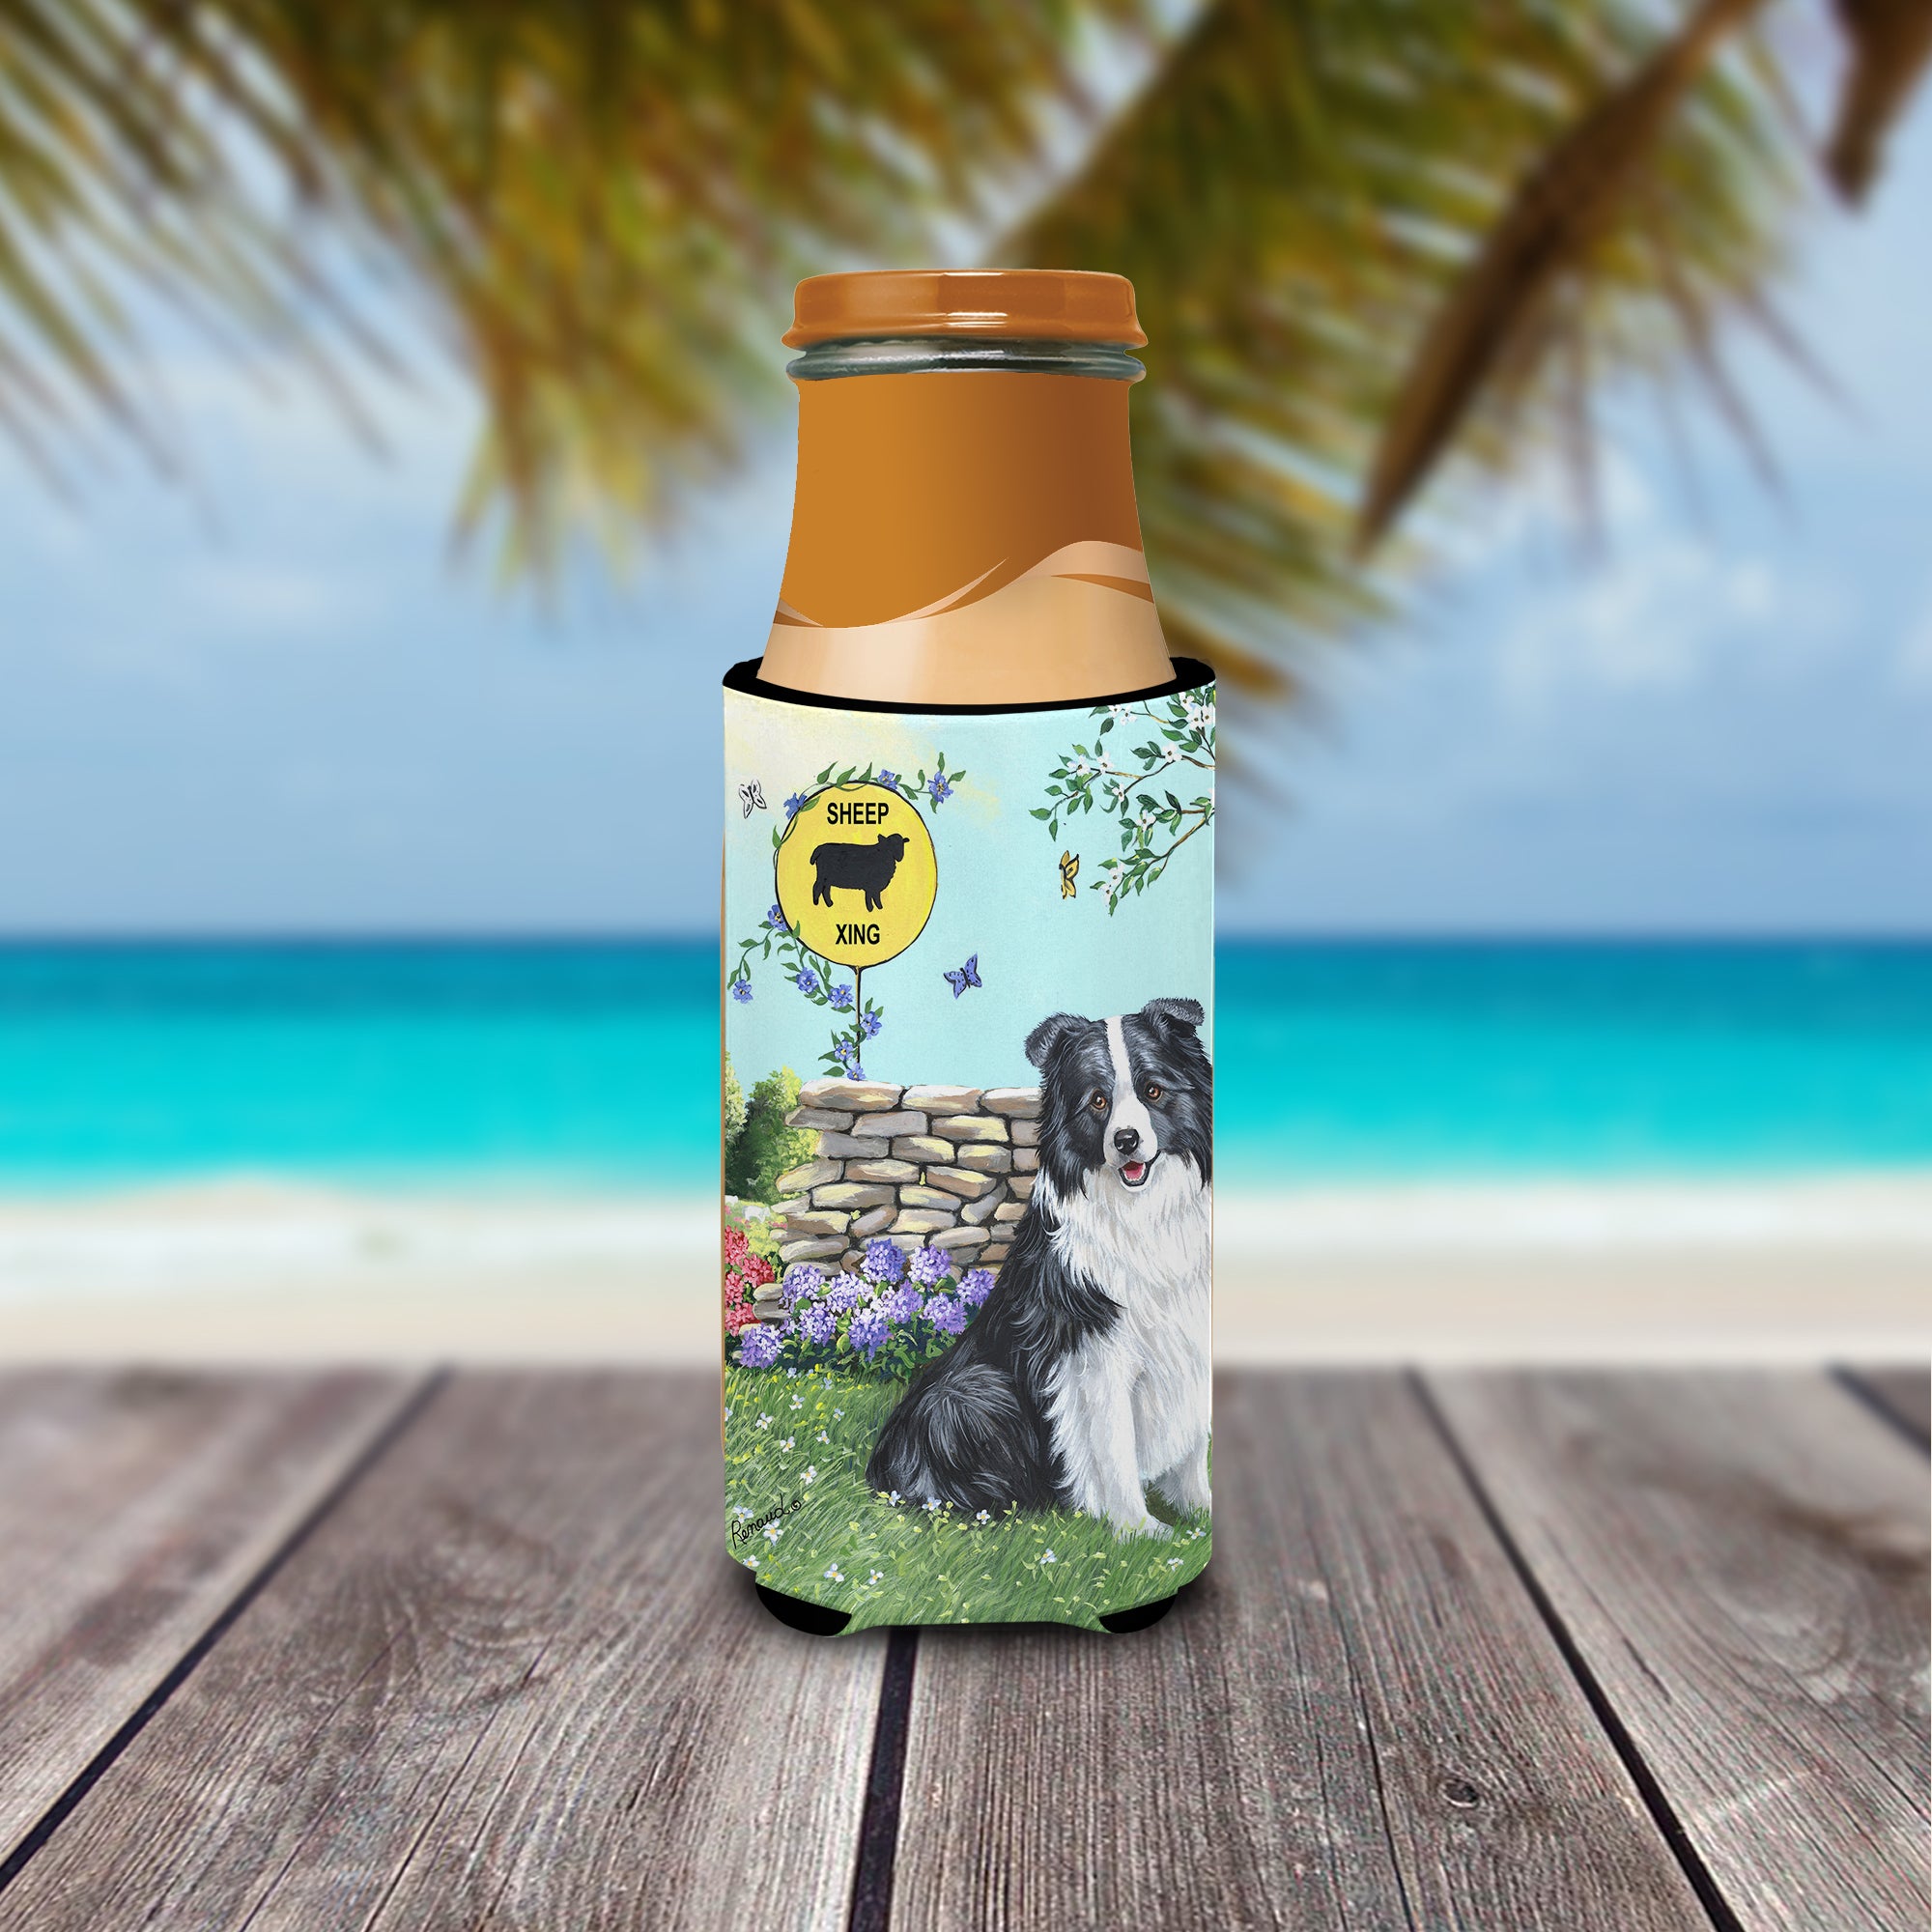 Border Collie Crossing Ultra Hugger for slim cans PPP3030MUK  the-store.com.